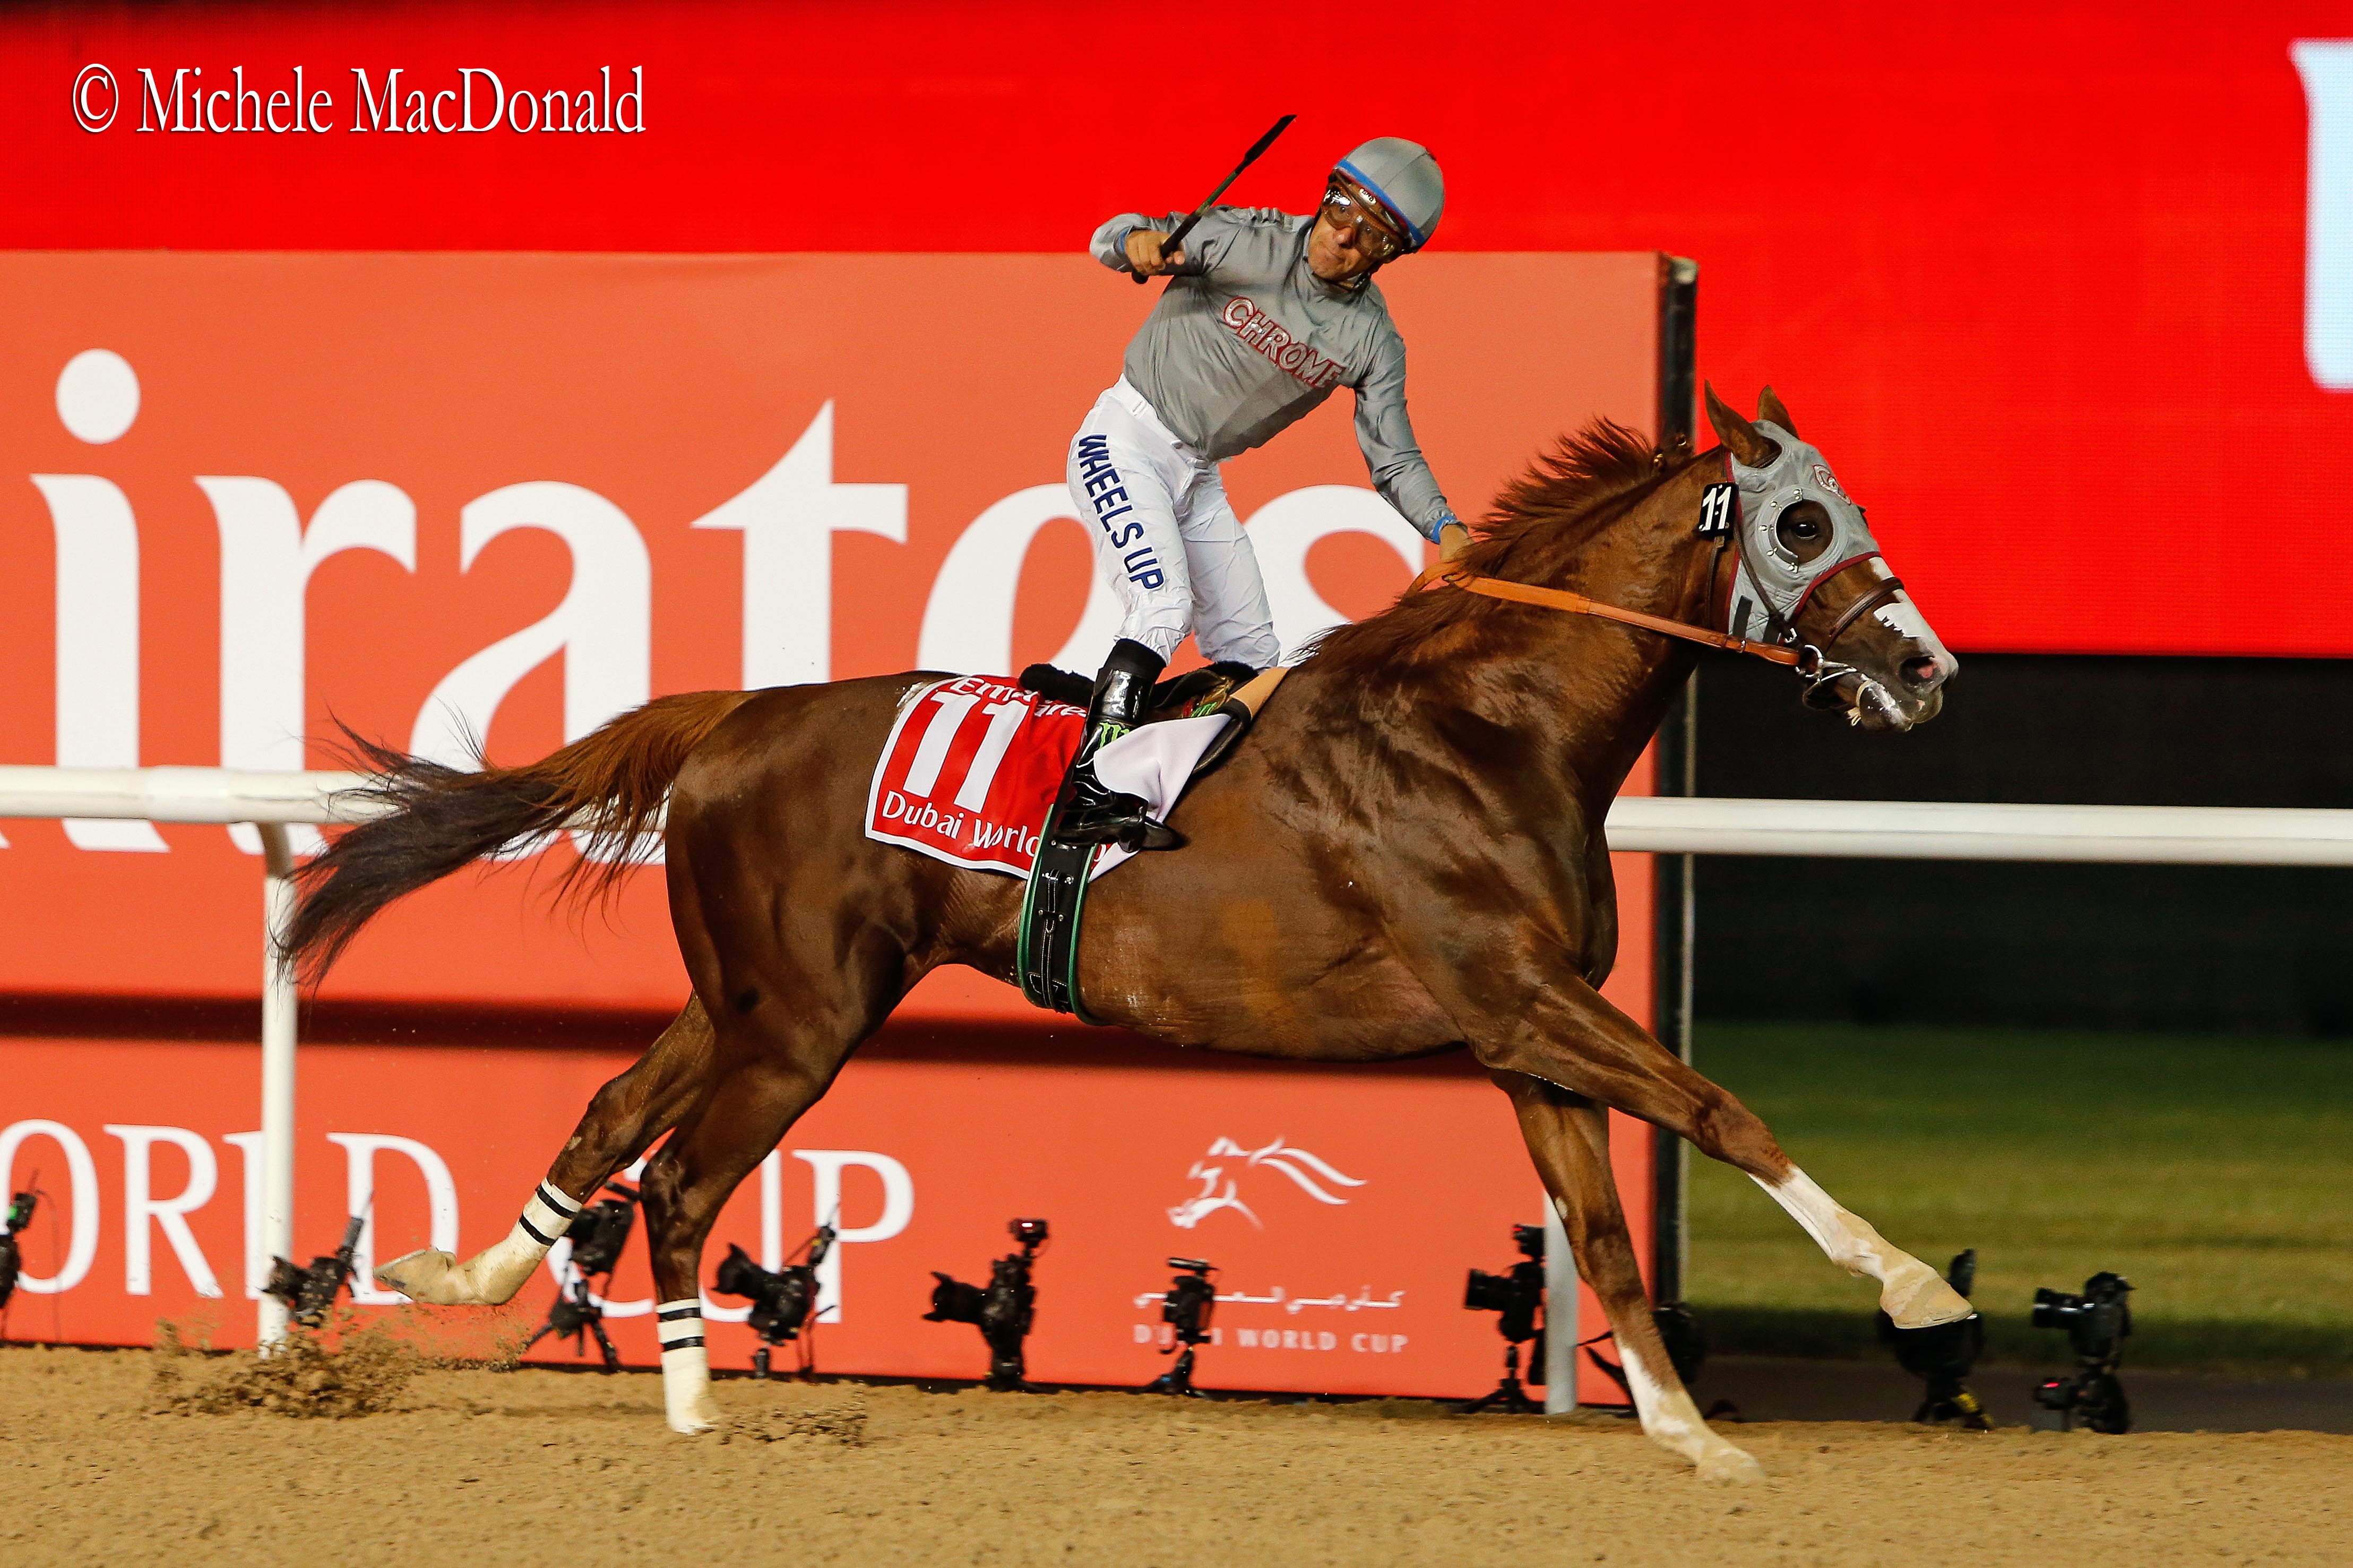 Electrifying: Chrome’s victory under Victor Espinoza in the $10 million Dubai World Cup in March. Photo: Michele MacDonald